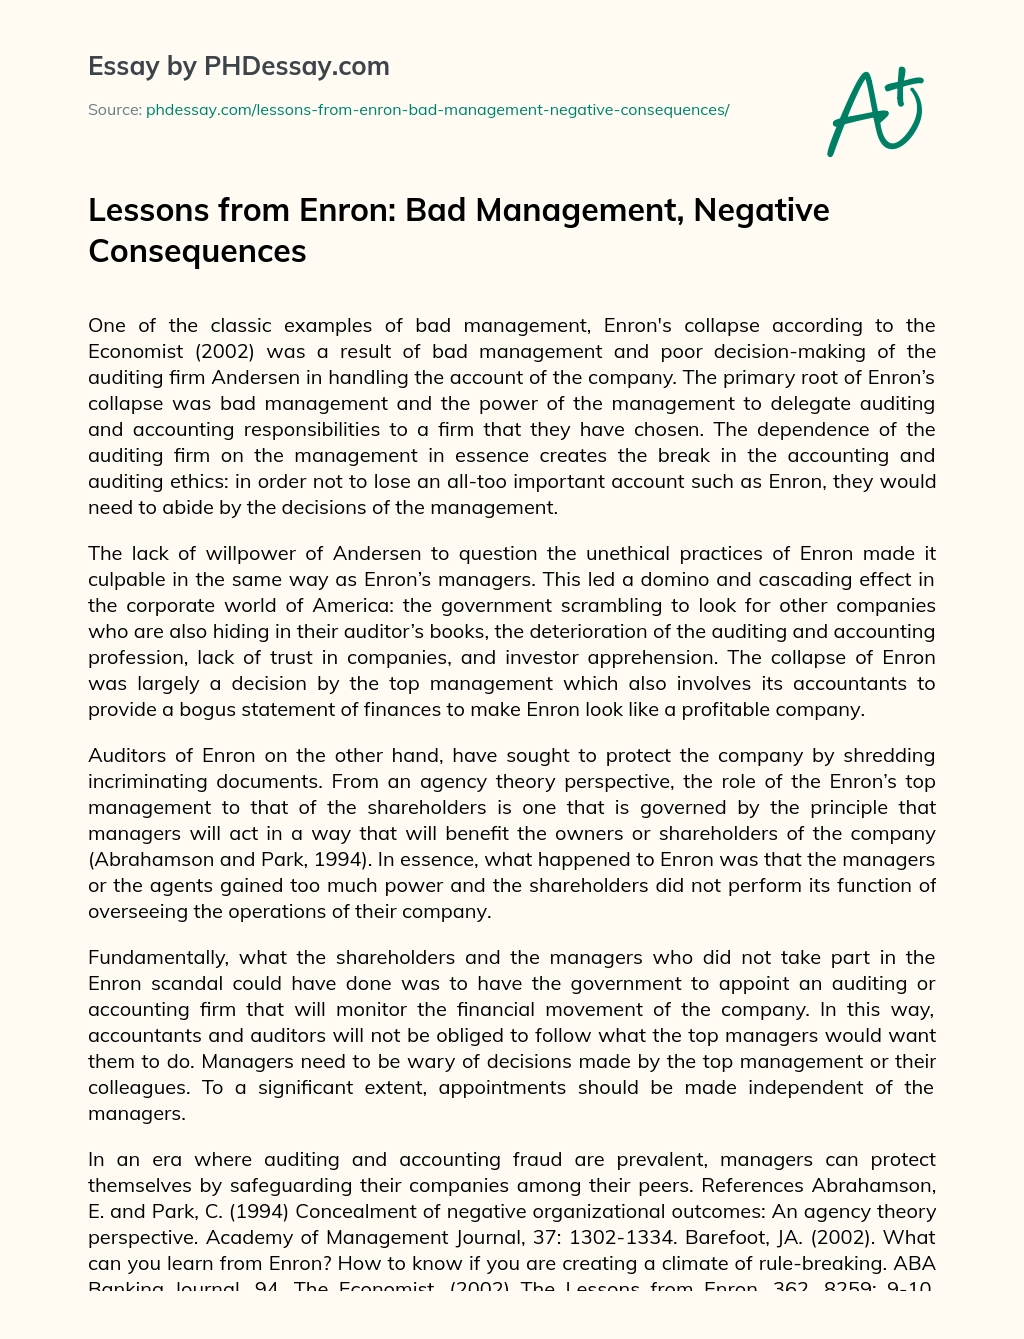 Lessons from Enron: Bad Management, Negative Consequences essay